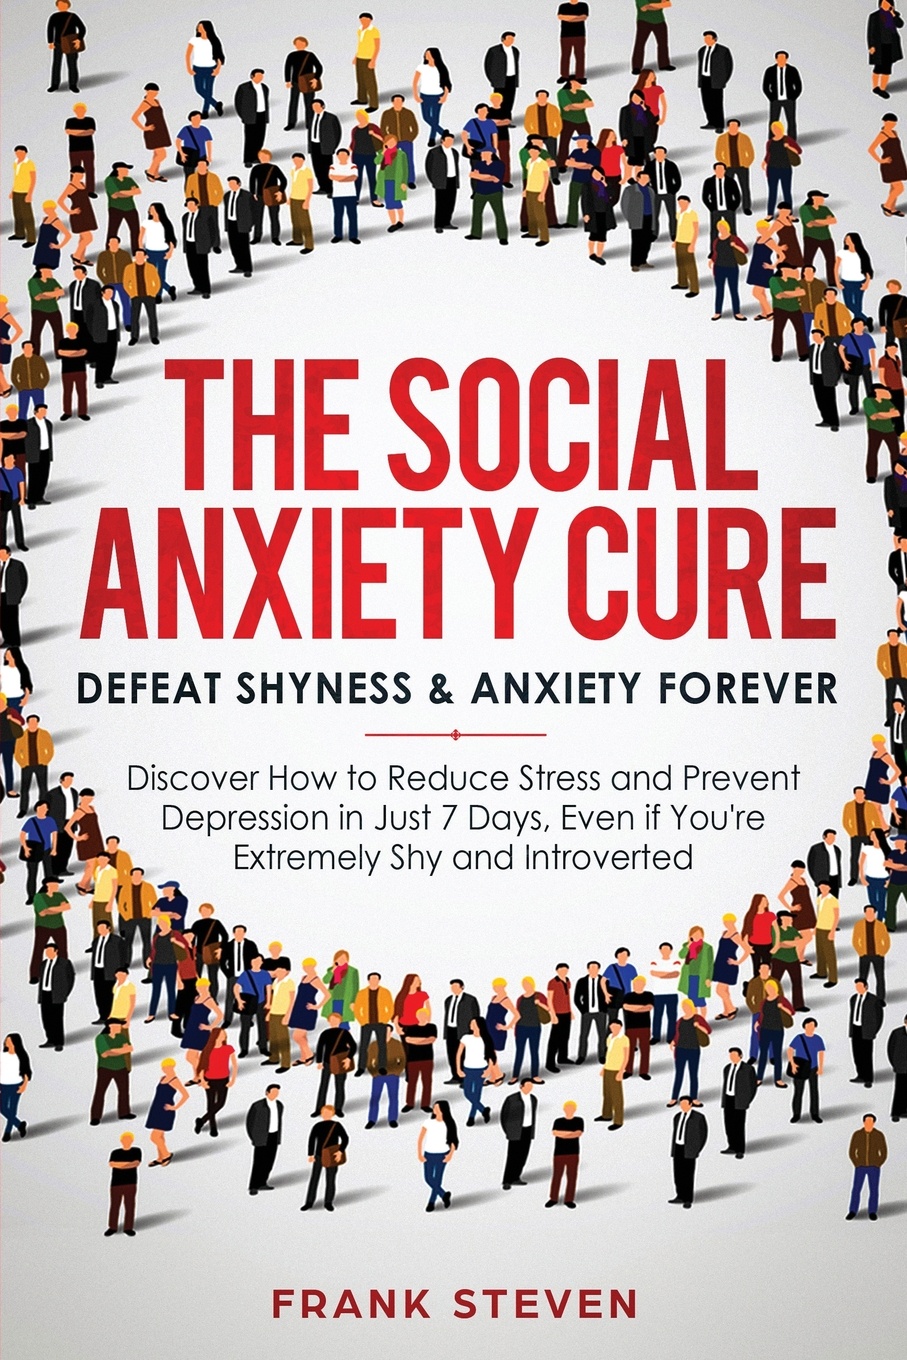 The Social Anxiety Cure. Defeat Shyness & Anxiety Forever: Discover How to Reduce Stress and Prevent Depression in Just 7 Days, Even if You`re Extremely Shy and Introverted